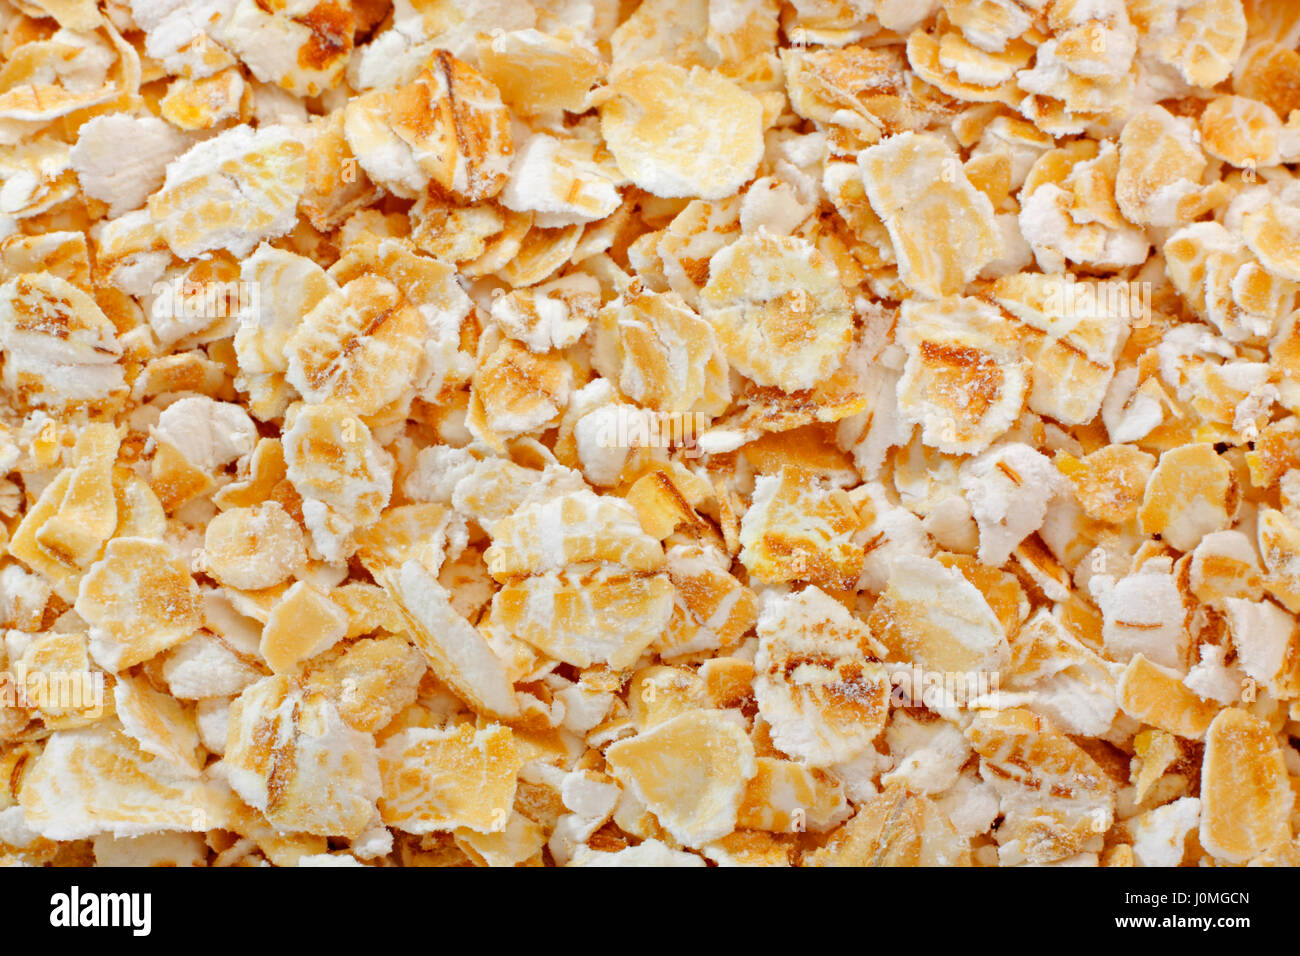 Rolled oats close up. Full frame shoot. Stock Photo